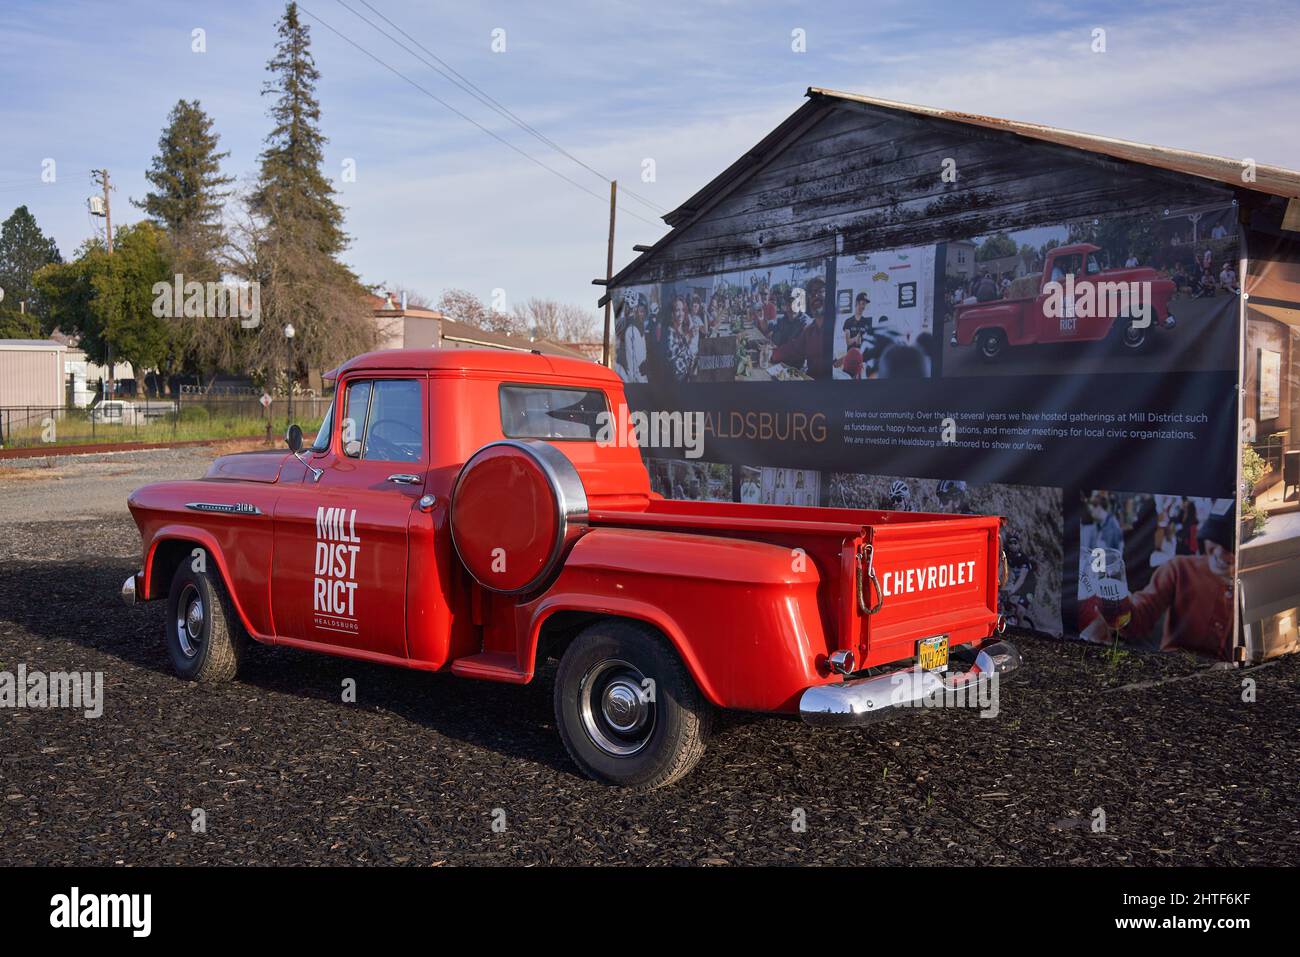 Healdsburg historic Mill District - red Chevrolet truck parked in front of building. Sonoma County, California. Stock Photo